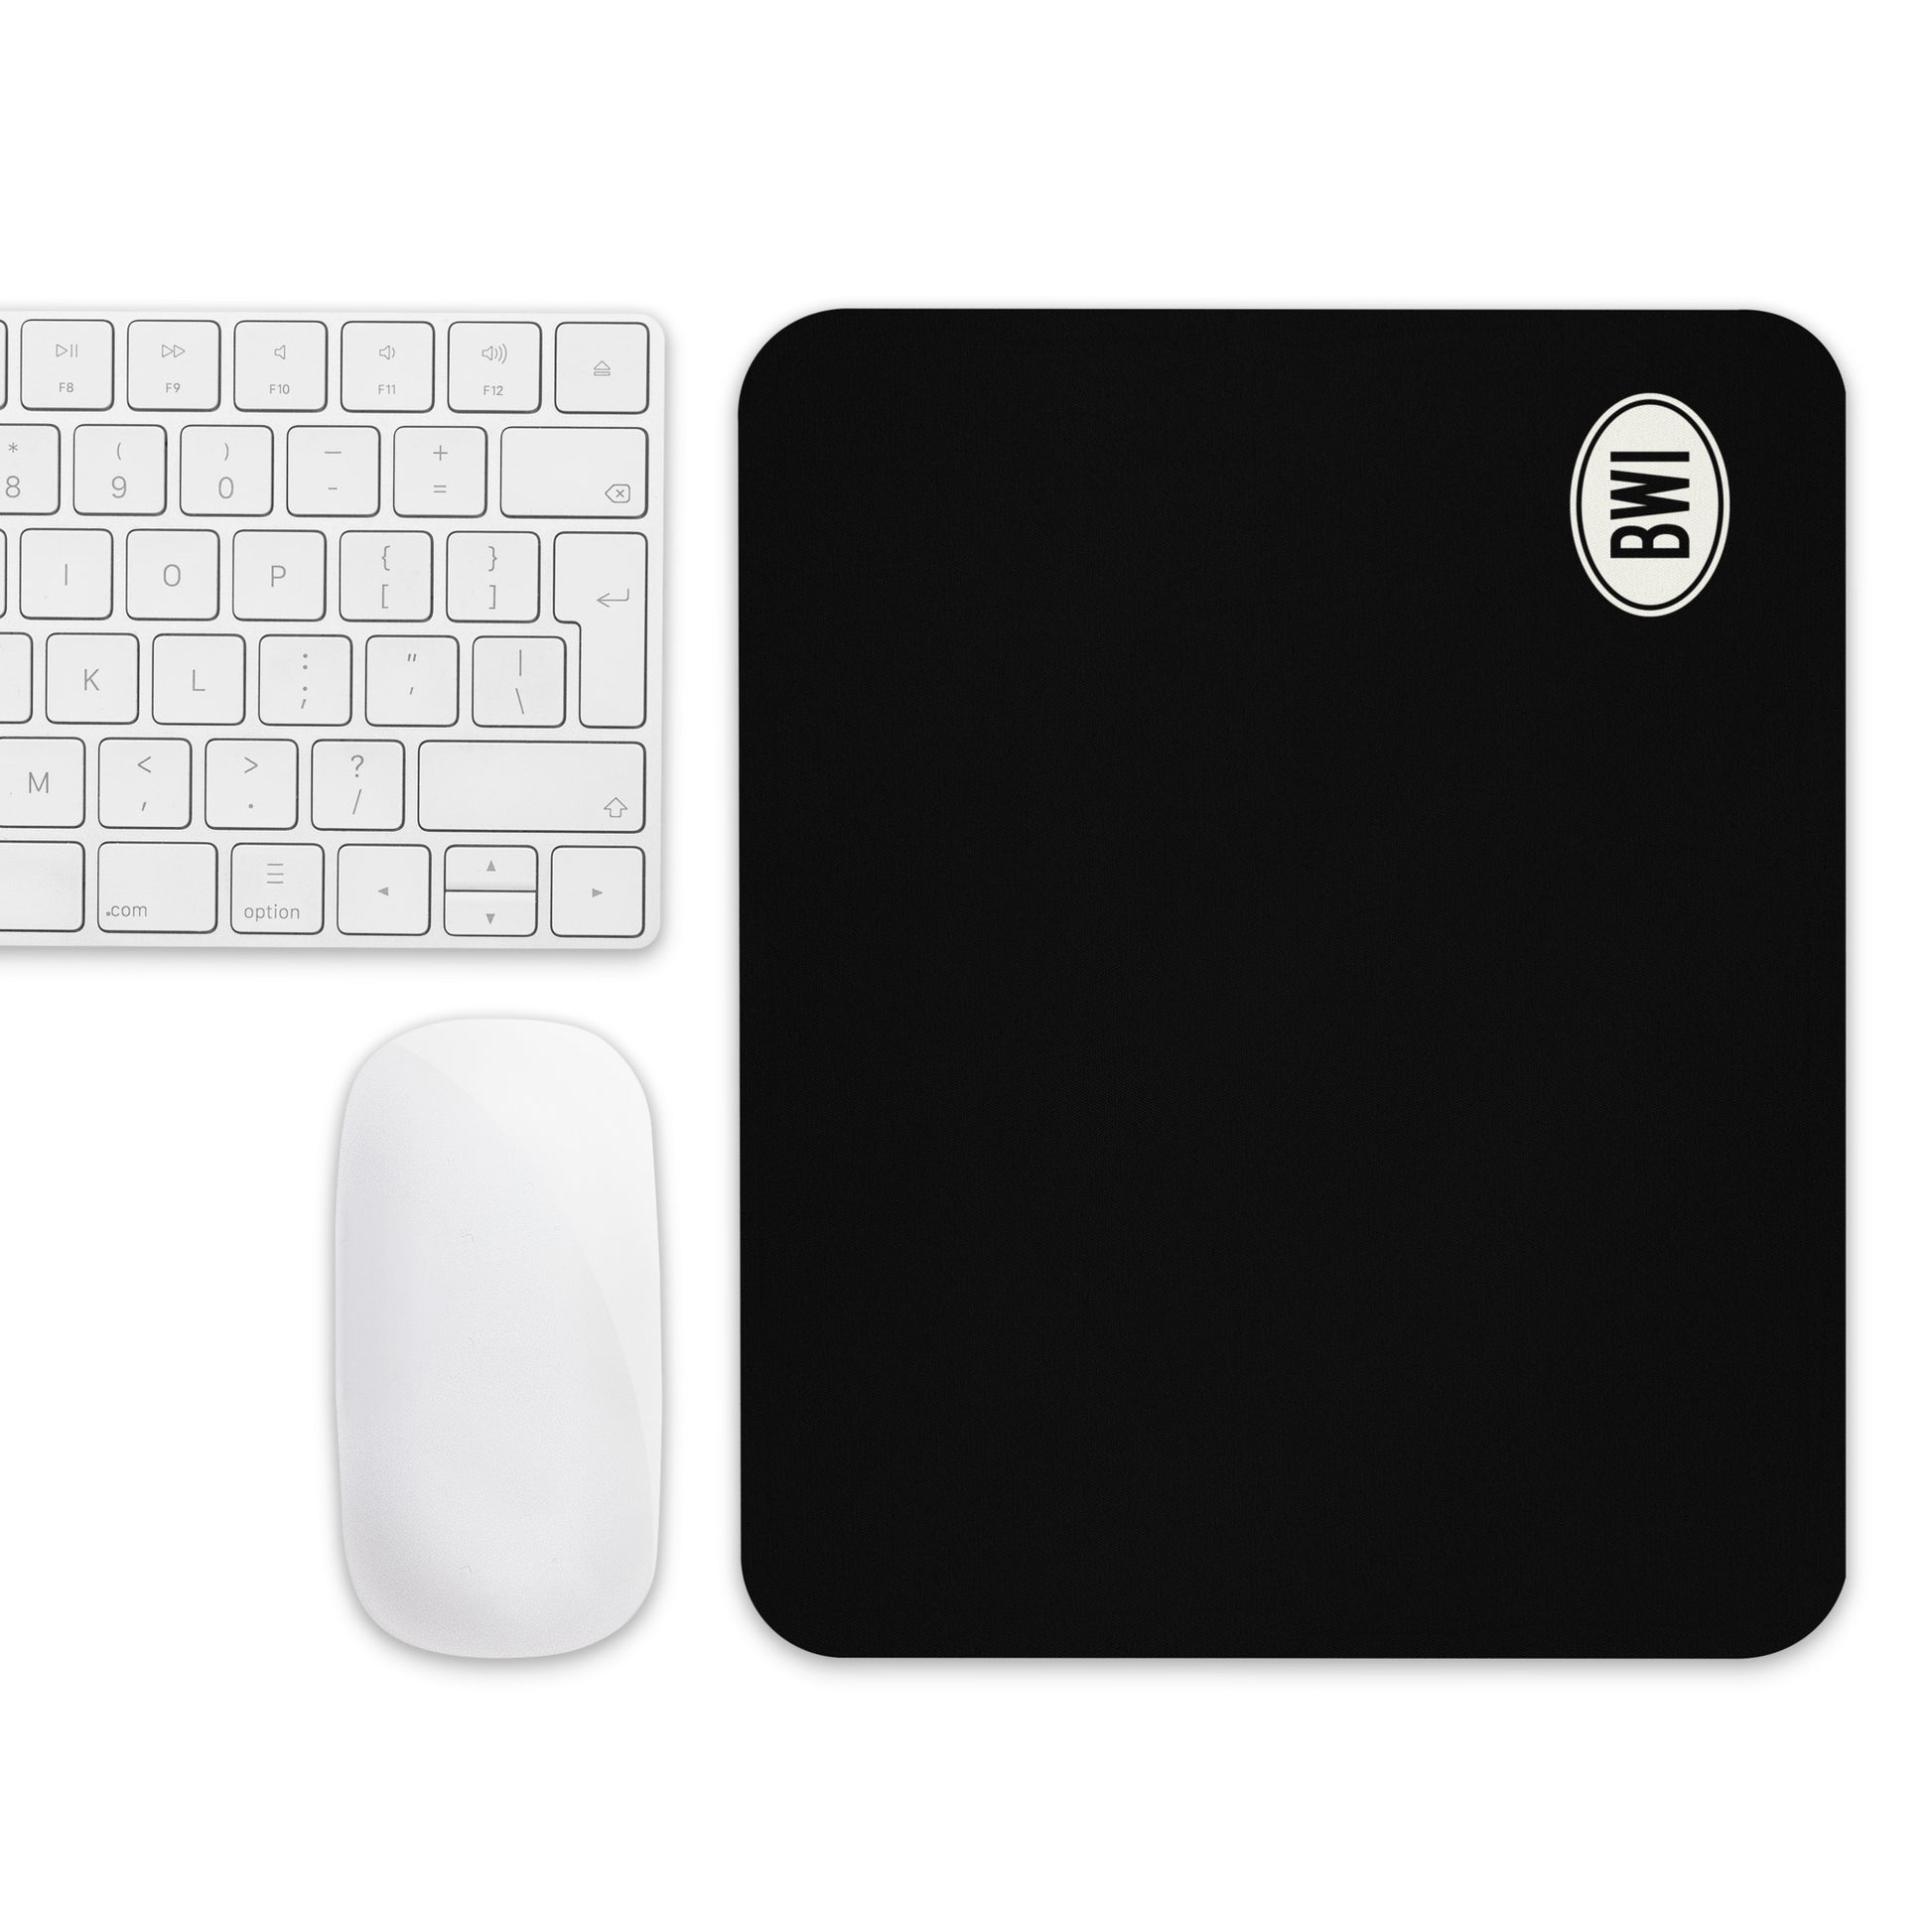 Unique Travel Gift Mouse Pad - White Oval • BWI Baltimore • YHM Designs - Image 04